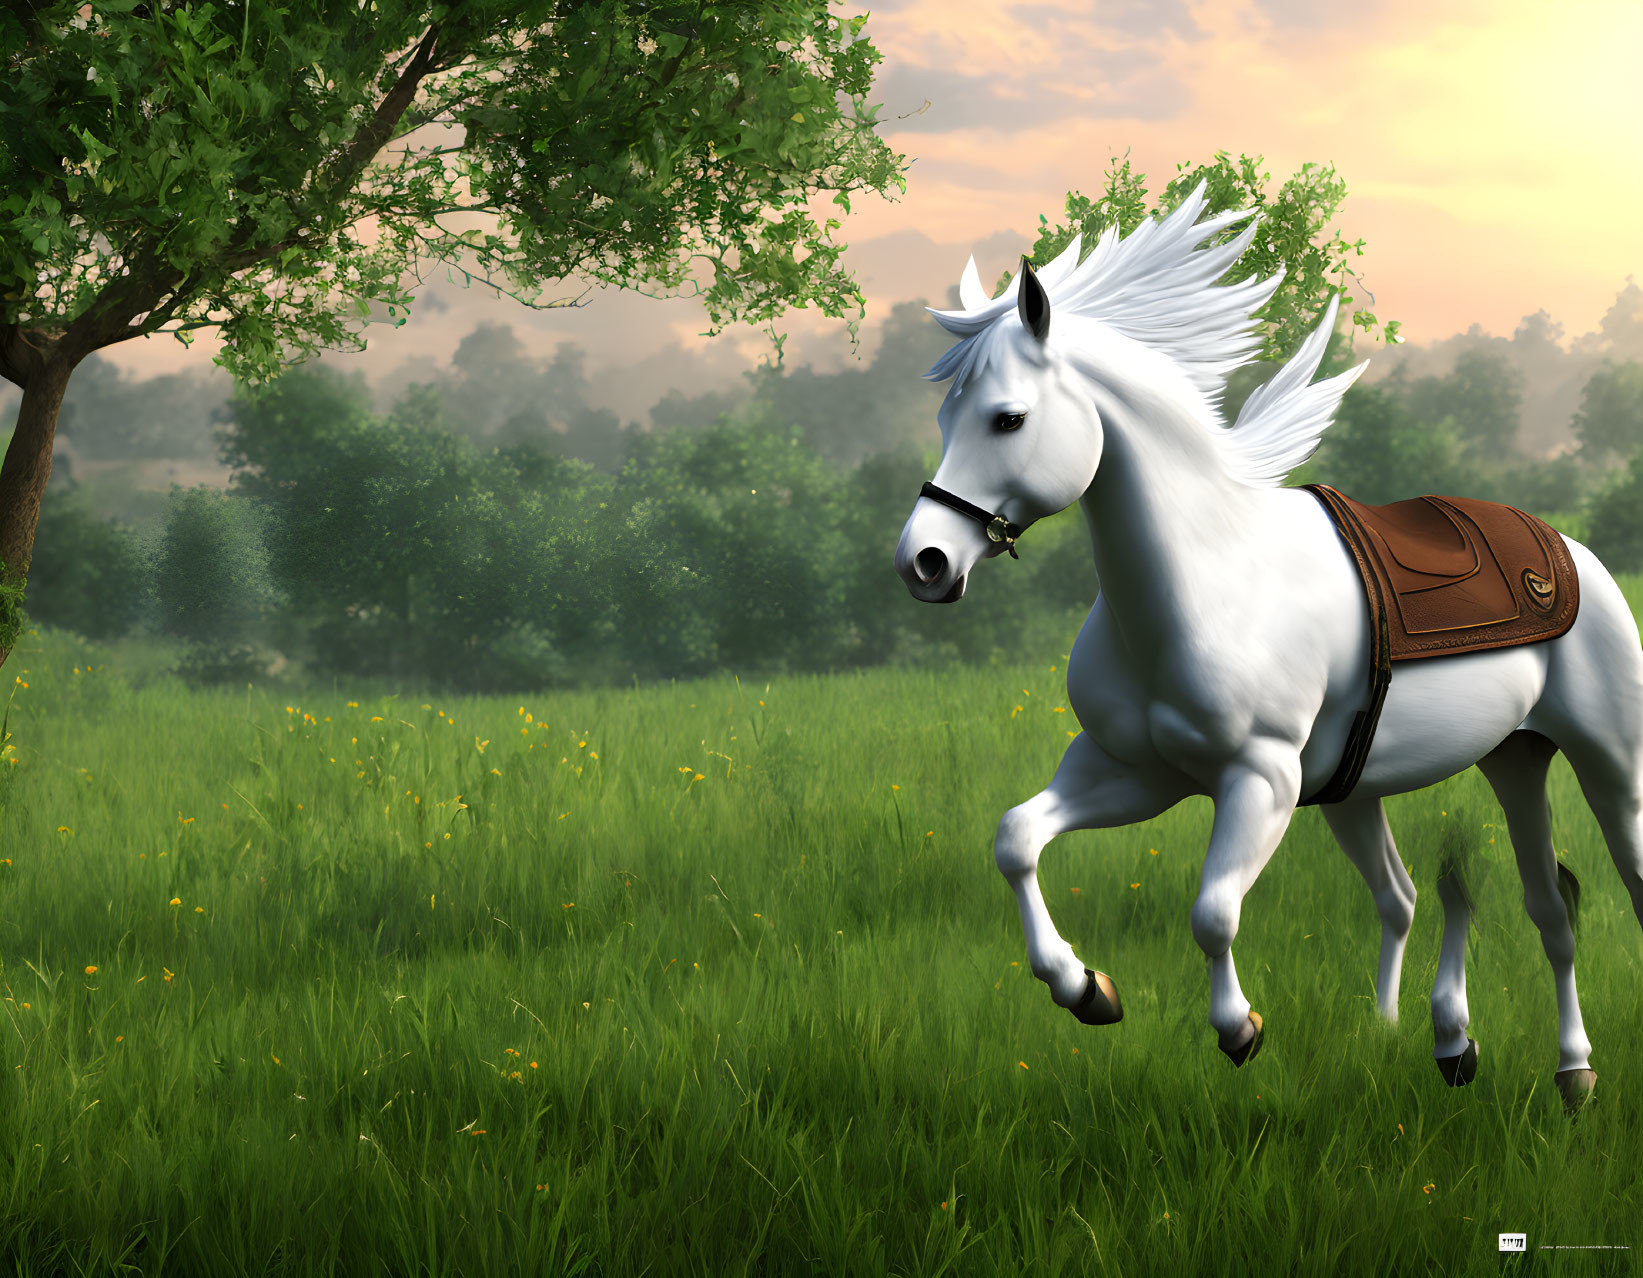 White Horse Galloping in Meadow with Brown Saddle, Yellow Wildflowers, and Large Tree